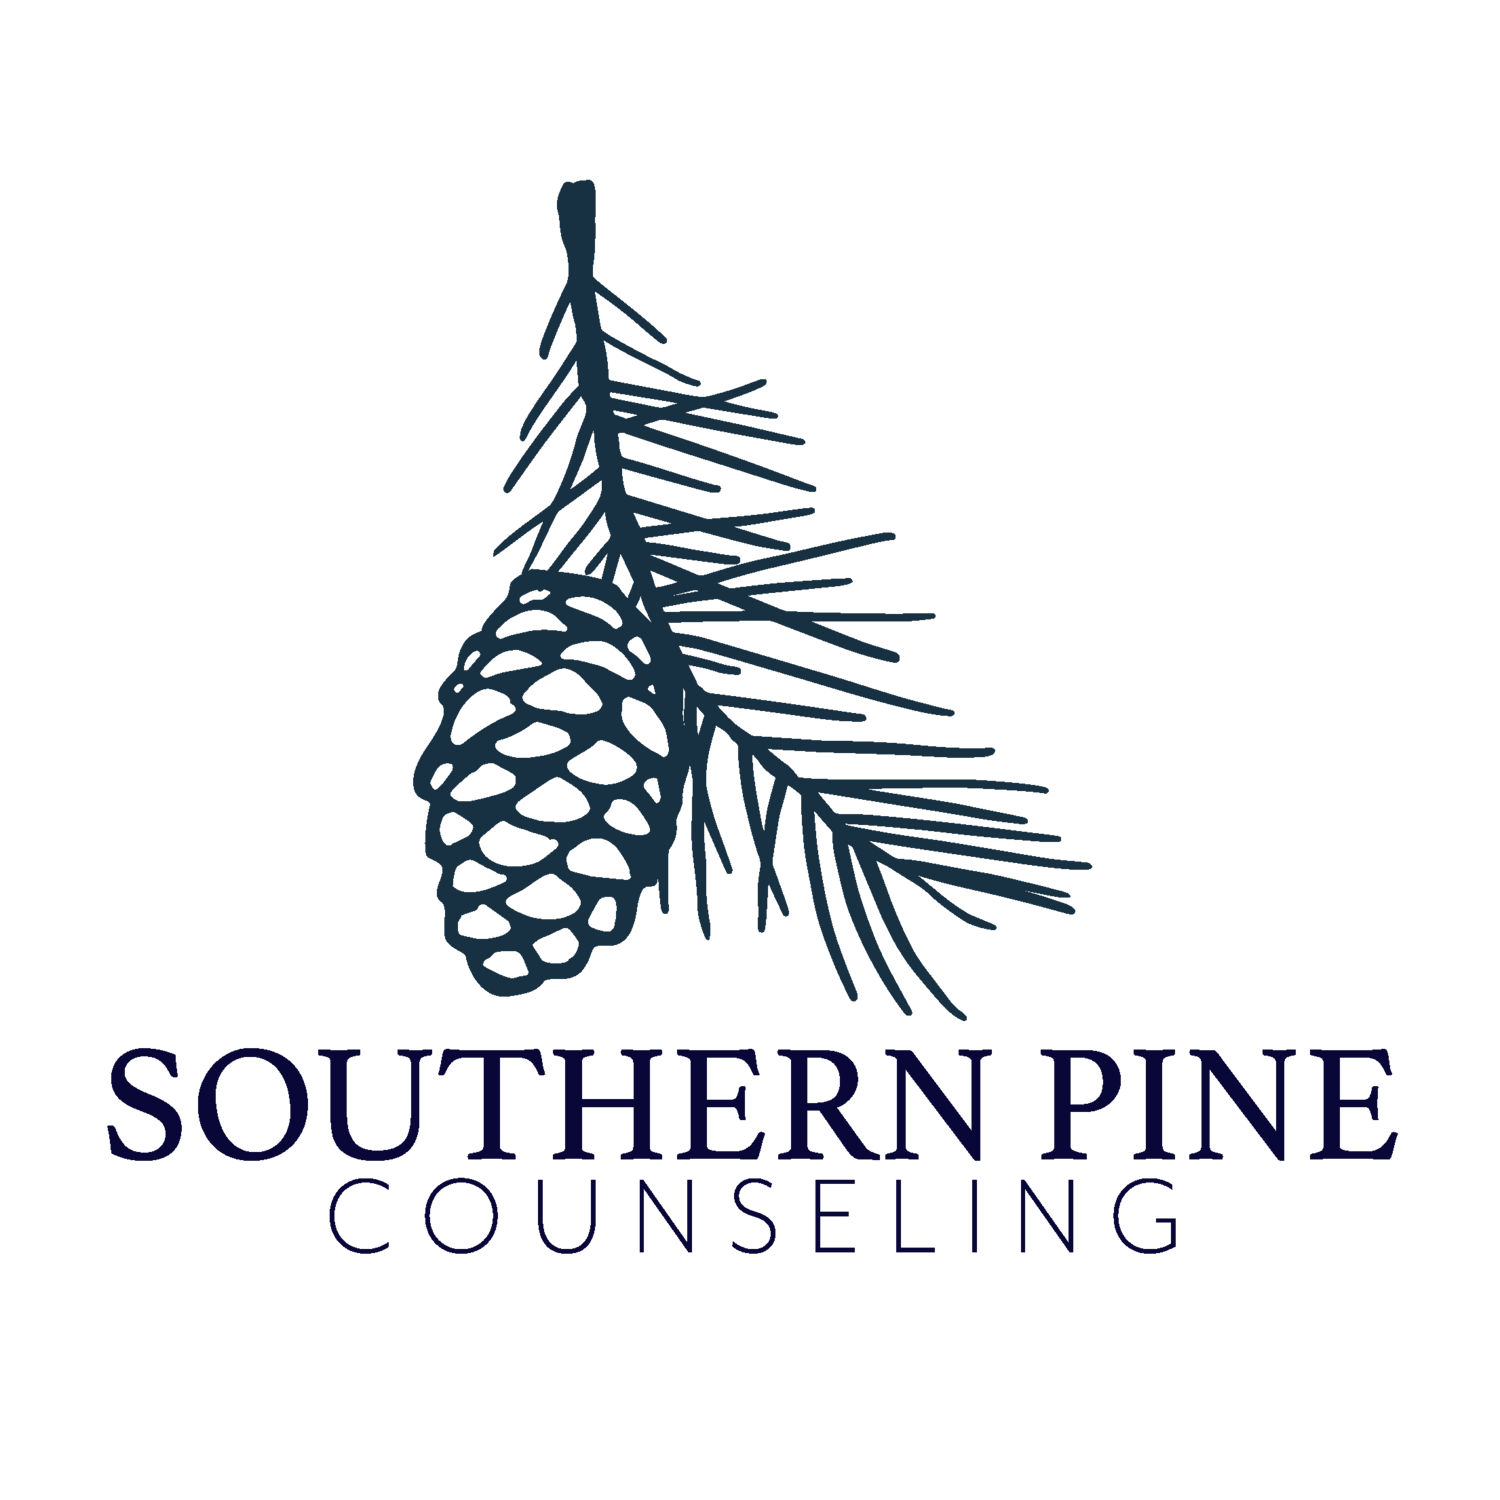 Southern Pine Counseling